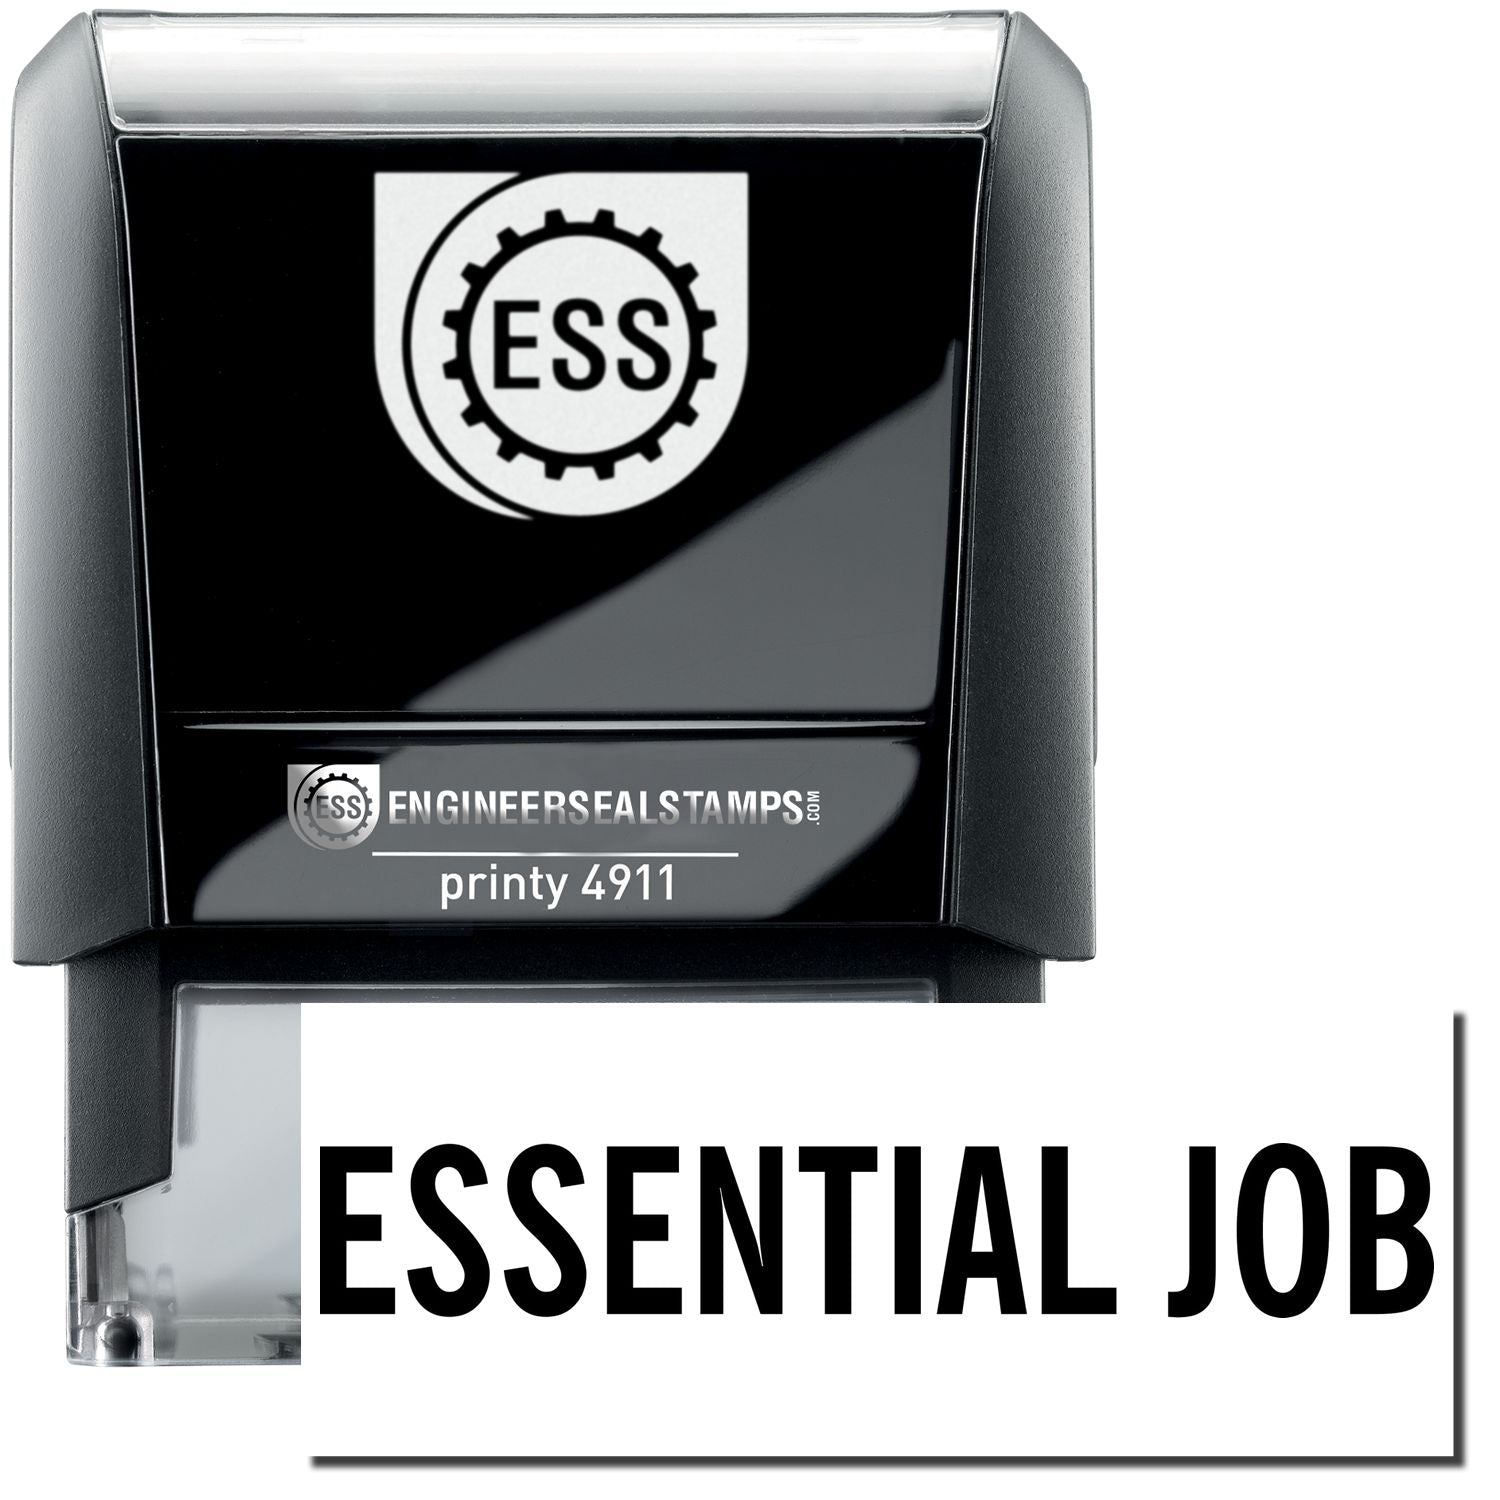 A self-inking stamp with a stamped image showing how the text "ESSENTIAL JOB" is displayed after stamping.